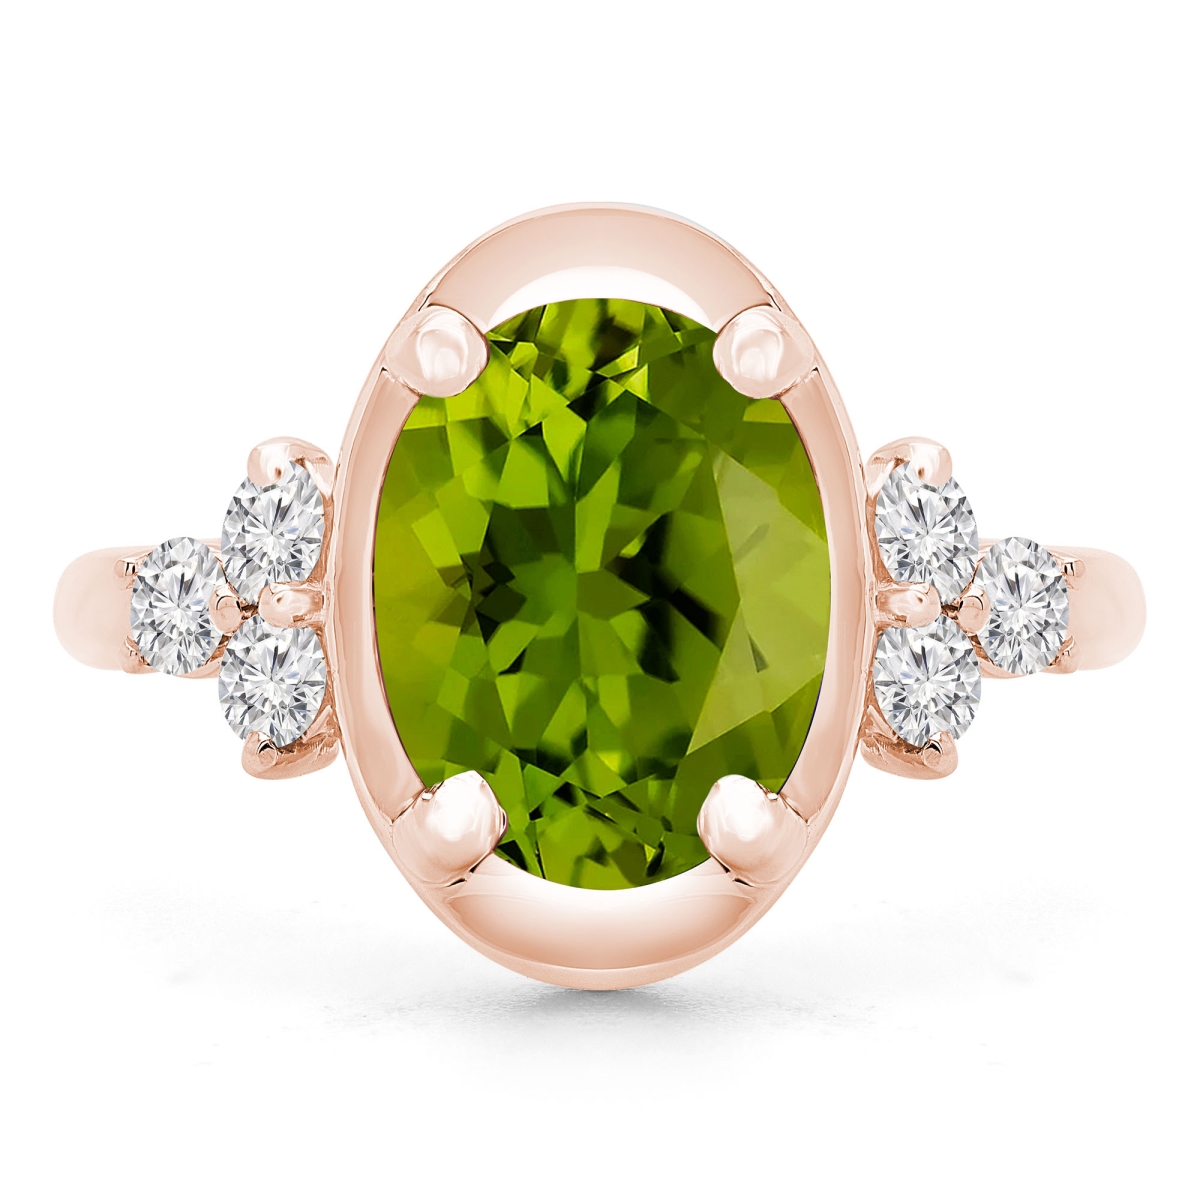 Picture of Majesty Diamonds MD190412-6.25 3.9 CTW Oval Green Peridot Cocktail Ring in 14K Rose Gold - Size 6.25